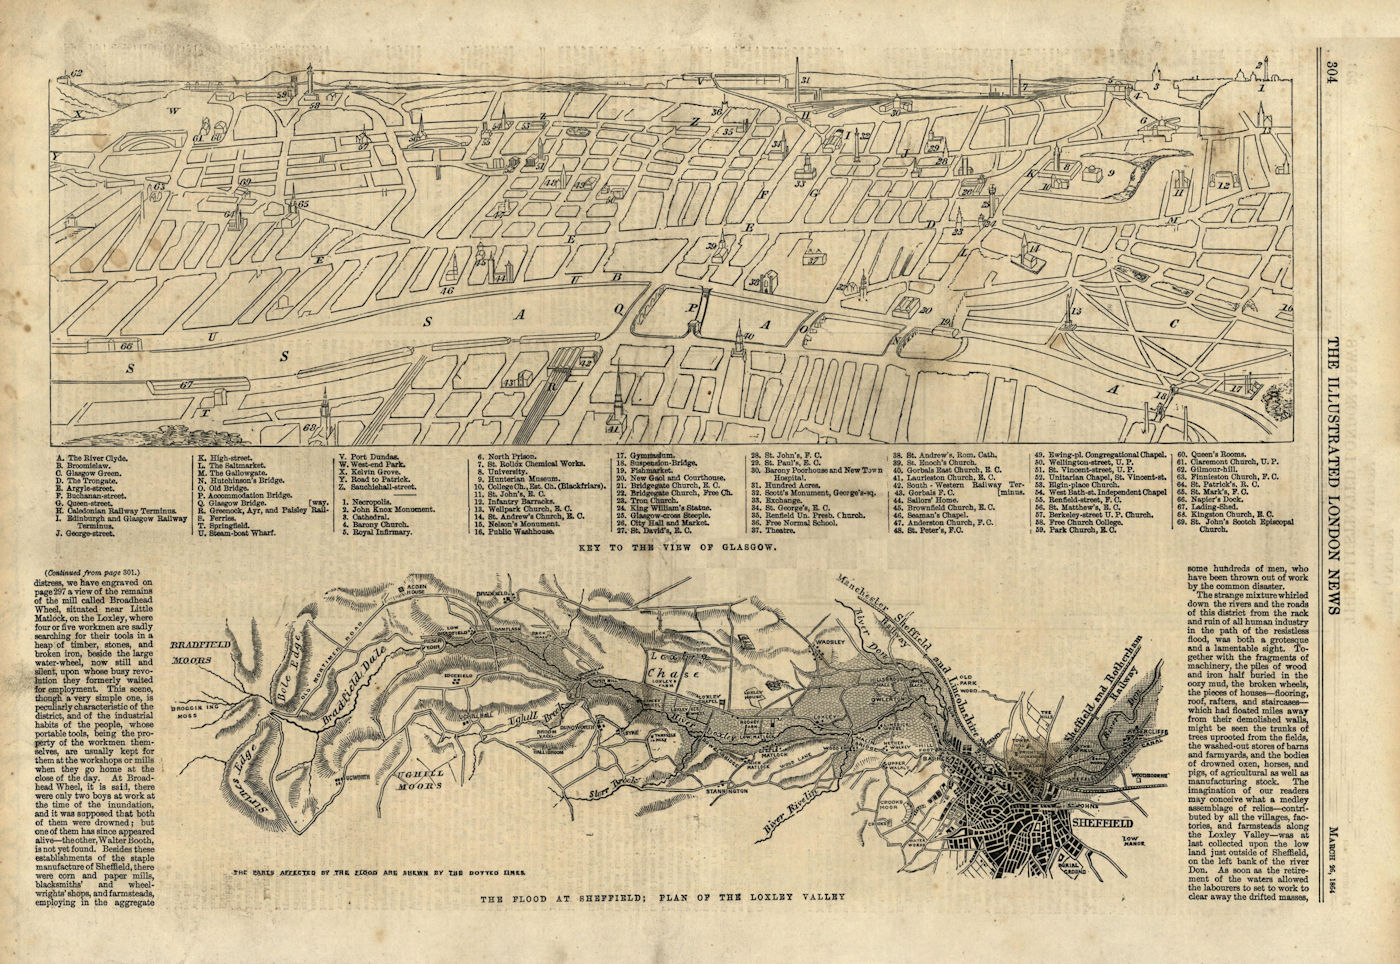 Associate Product Key to the view of Glasgow. The Flood at Sheffield: Loxley Valley plan 1864 map